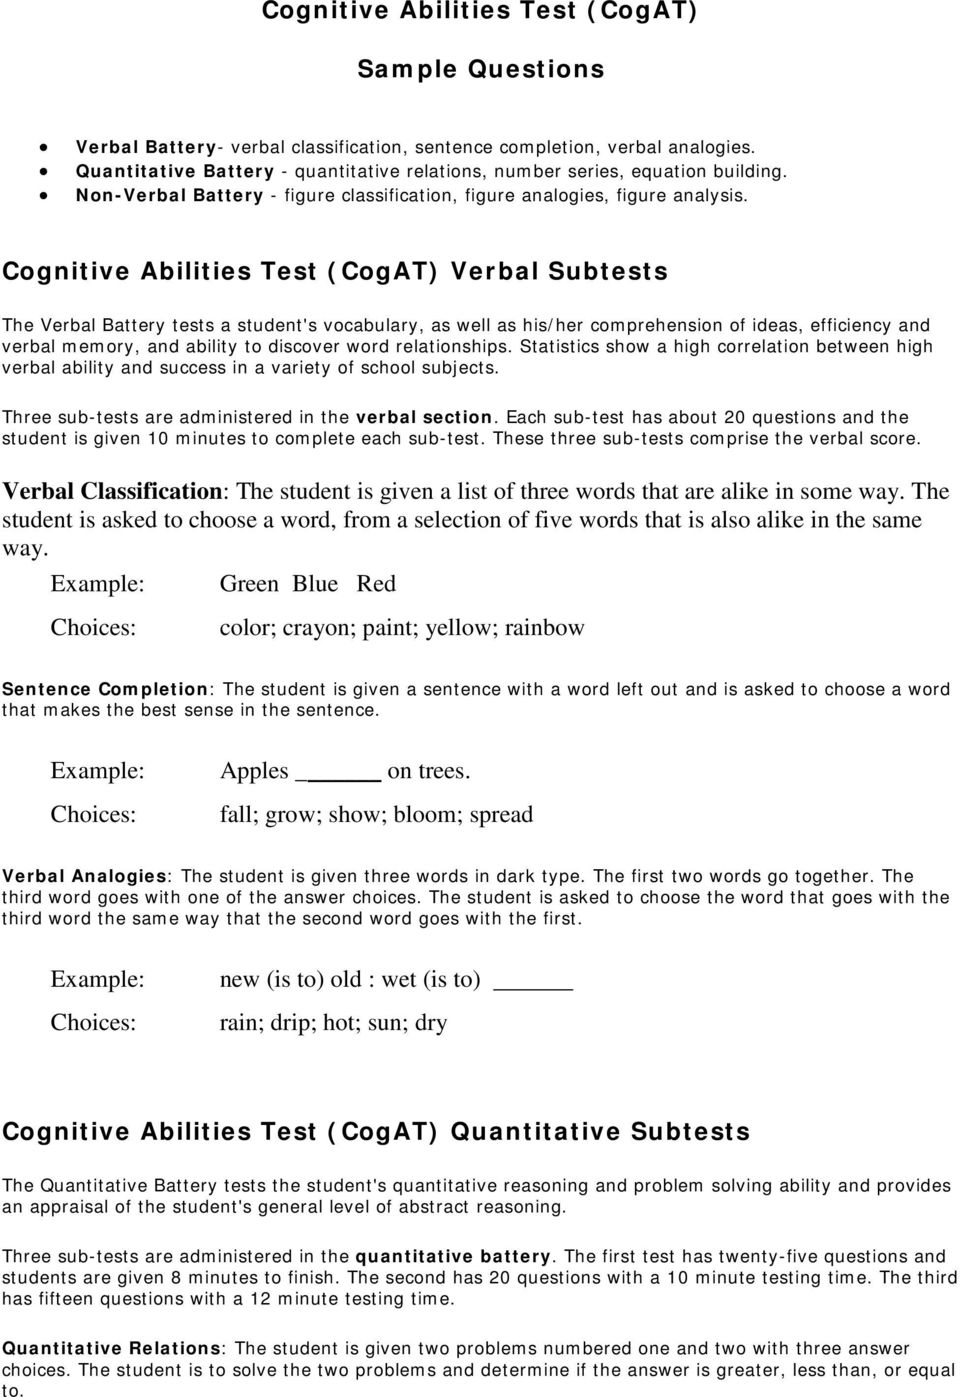 Cognitive Abilities Test (CogAT) Verbal Subtests The Verbal Battery tests a student's vocabulary, as well as his/her comprehension of ideas, efficiency and verbal memory, and ability to discover word